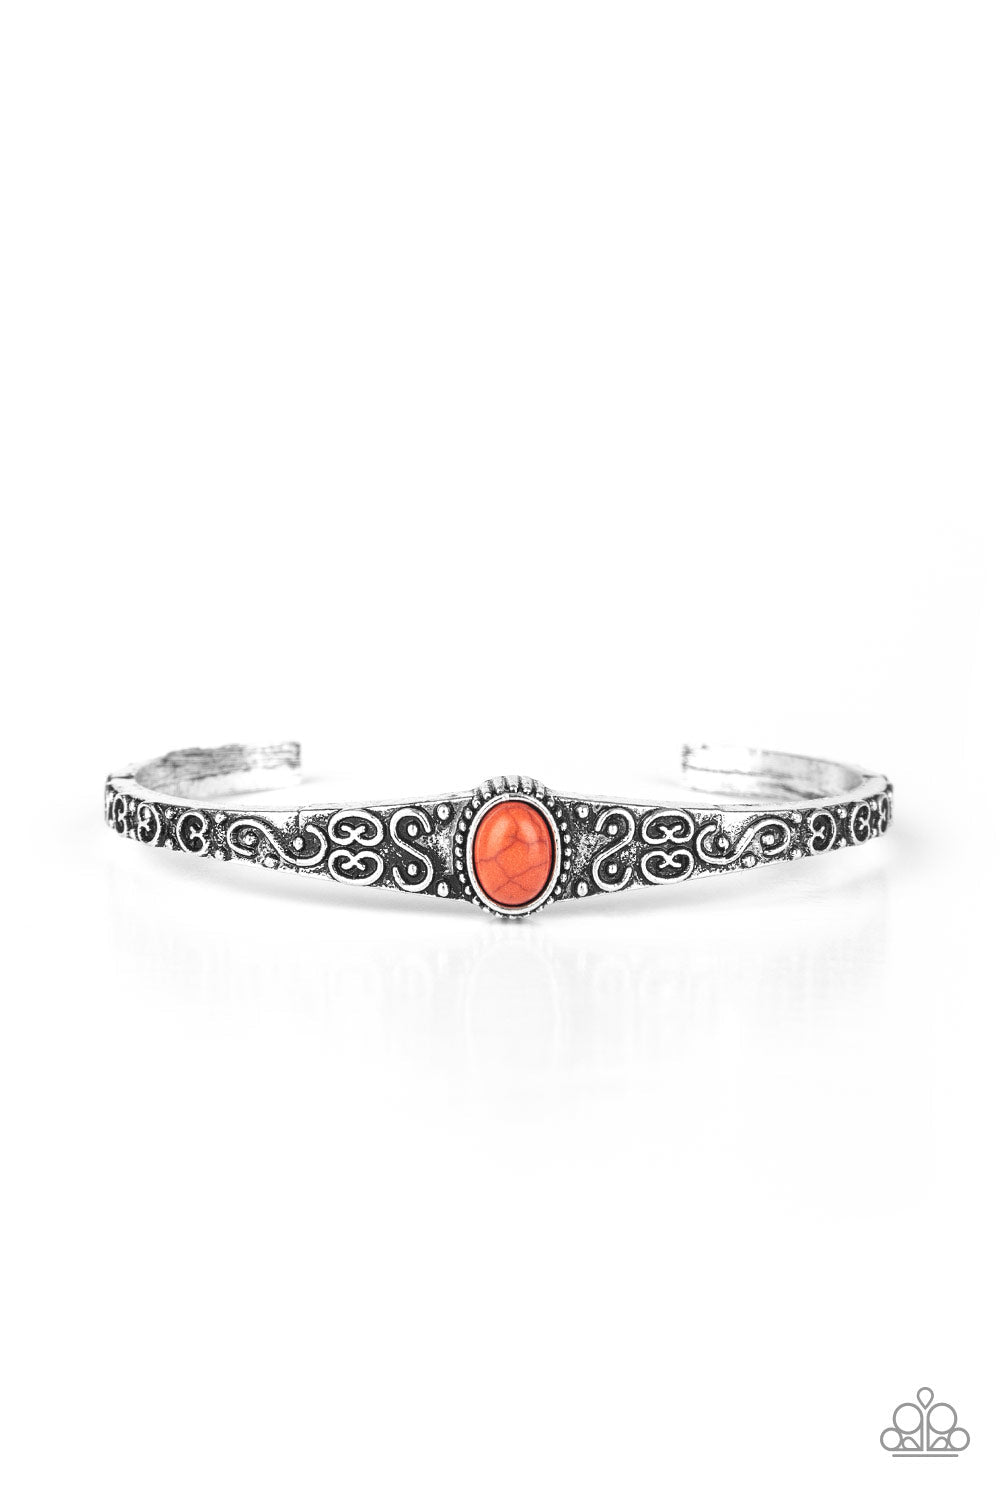 Make Your Own Path - Orange and Silver Cuff Bracelet - Paparazzi Accessories - Infused with an earthy orange stone center, a dainty silver cuff has been embossed in swirling antiqued detail for a seasonal look. Sold as one individual bracelet.